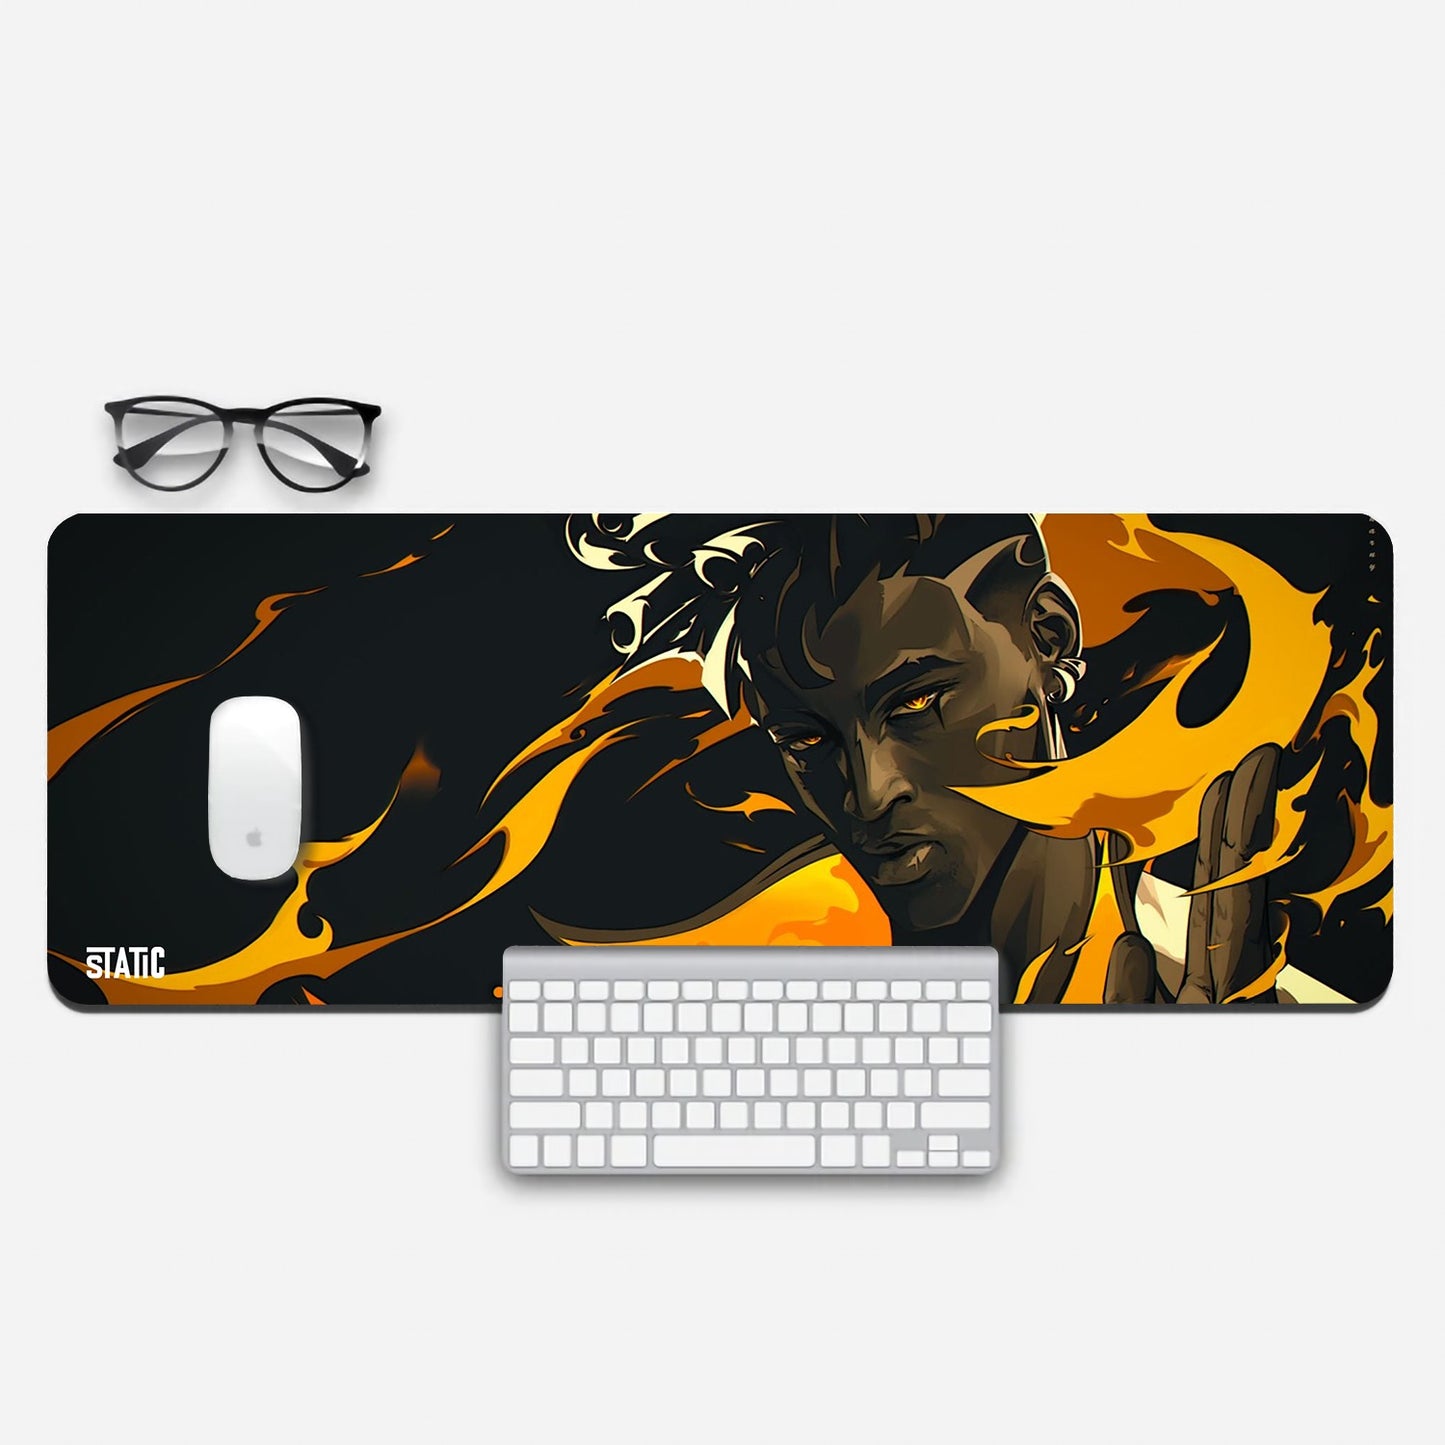 Elevate your gaming experience with our Extended Gaming Mouse Pad showcasing Phoenix from Valorant, engulfed in blazing amber flames with fiery eyes aglow. This 800x300mm pad offers precision and style, ensuring you dominate your matches. Immerse yourself in the Valorant universe, boost your gameplay, and set your desk ablaze with Phoenix's fiery spirit. Get yours now and ignite your victories!